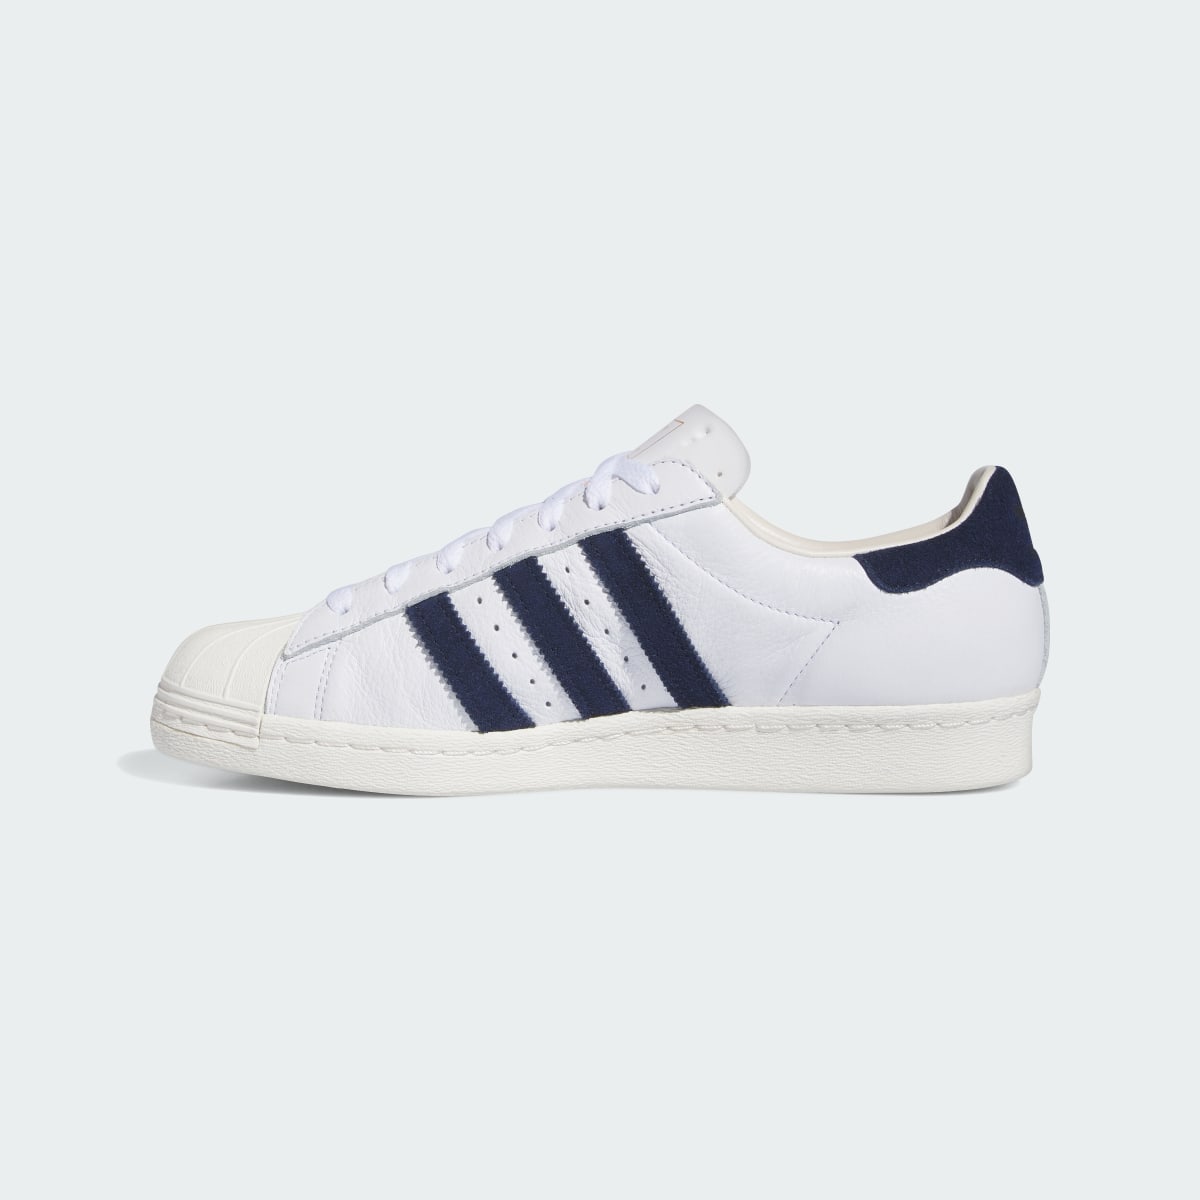 Adidas Pop Trading Co Superstar ADV Trainers. 8